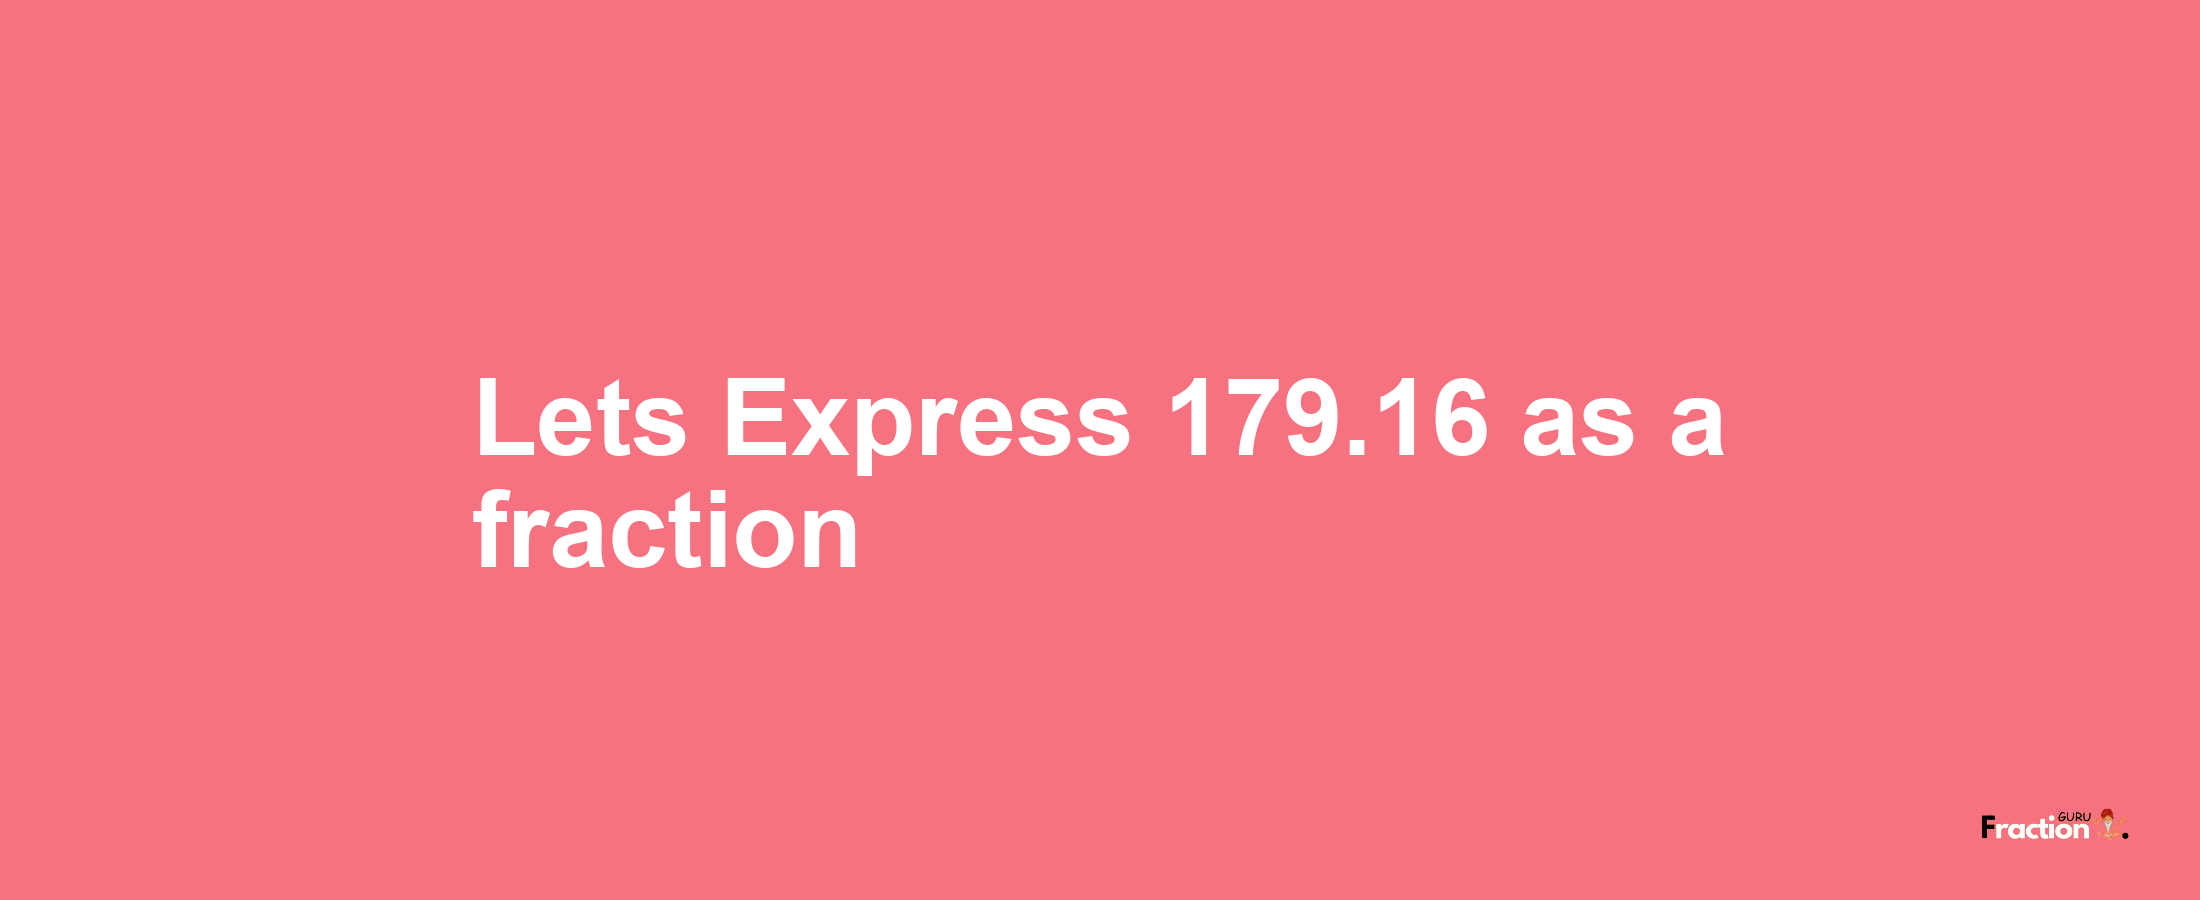 Lets Express 179.16 as afraction